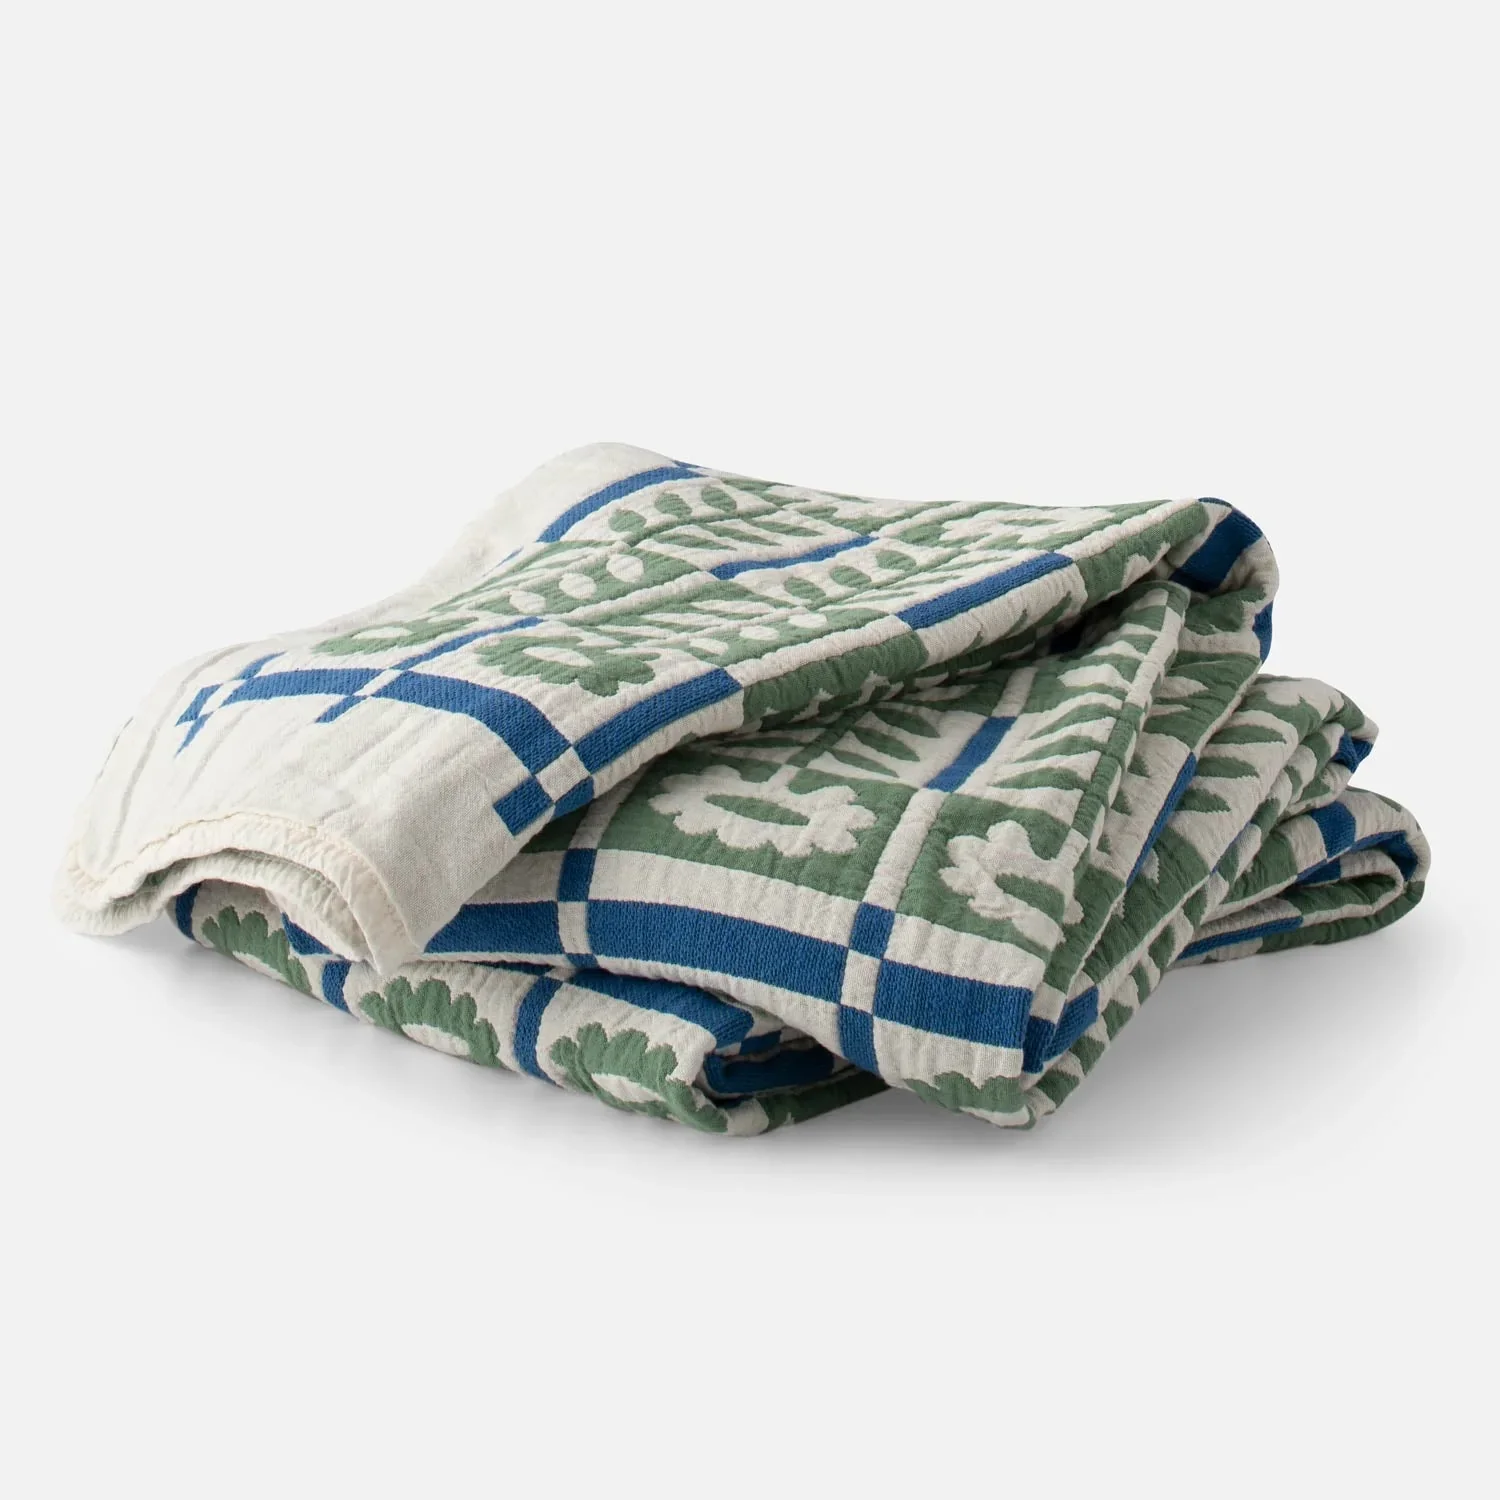 A folded olive, white, and cerulean blue floral quilt amidst a white background.